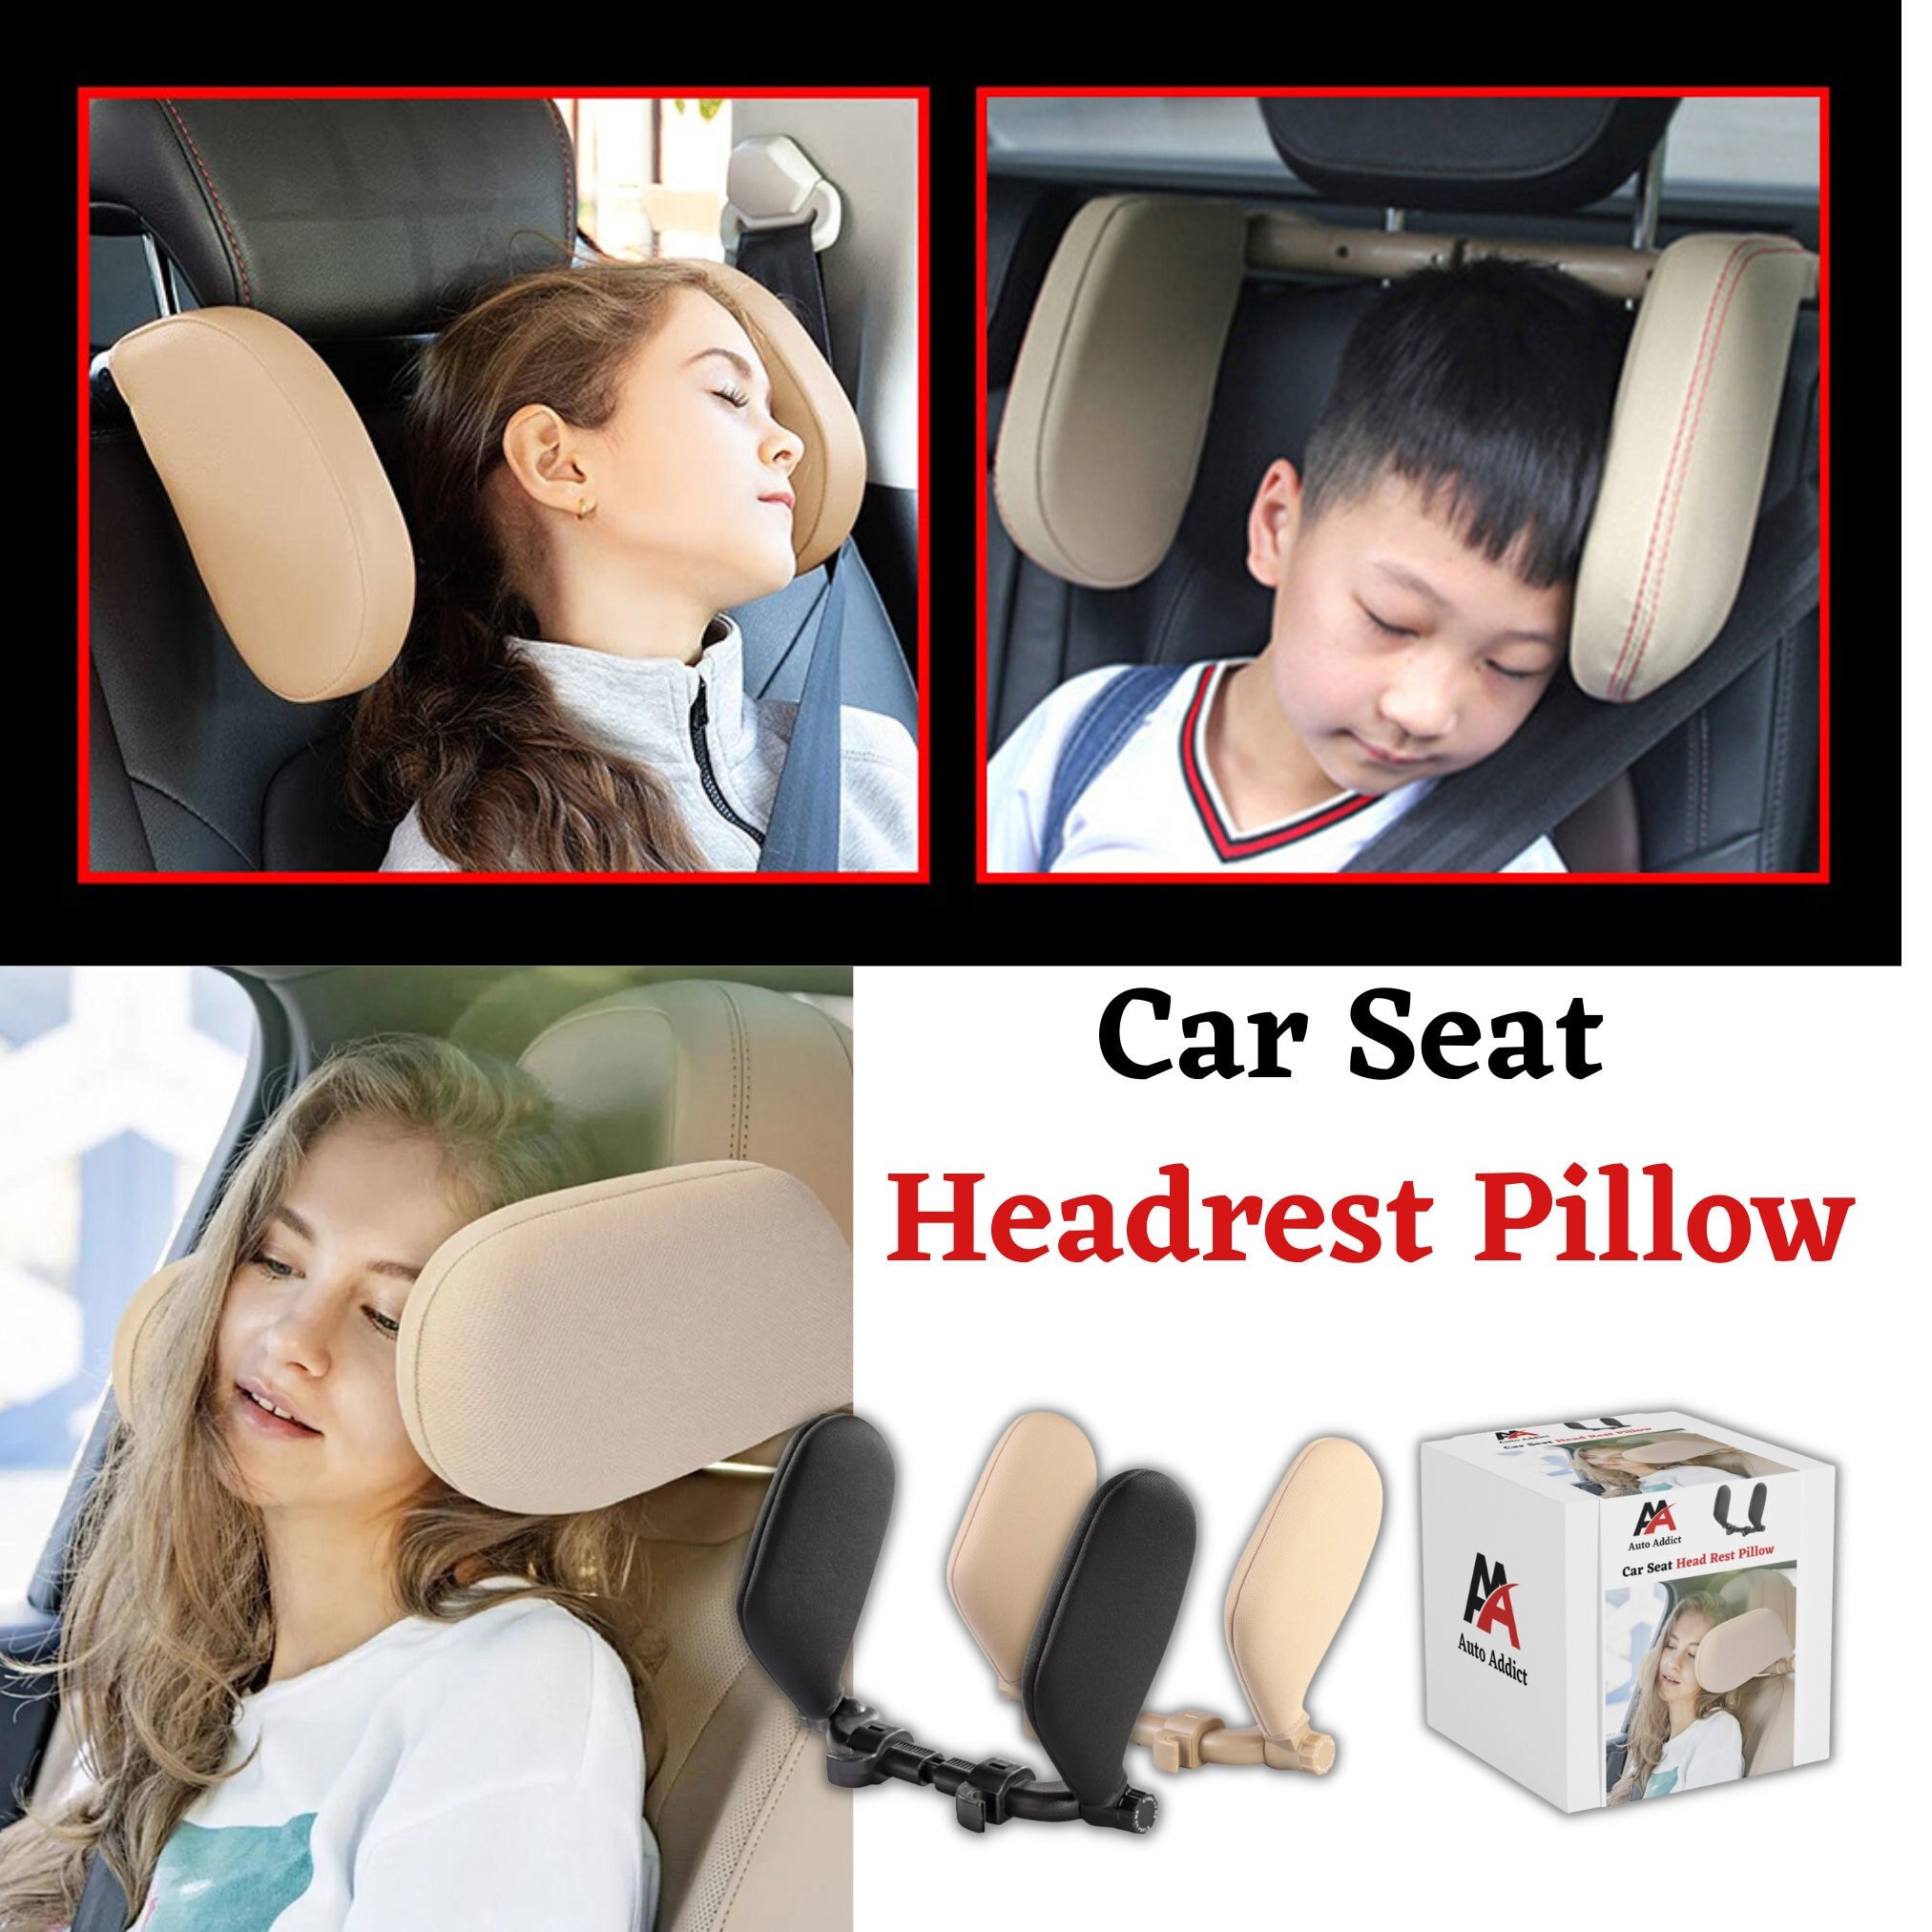 Lov Car Neck Pillow for Driving,Office Chair Memory Foam Neck Pillow for Cervical Support and Neck Pain Relief with Adjustable Straps - Headrest